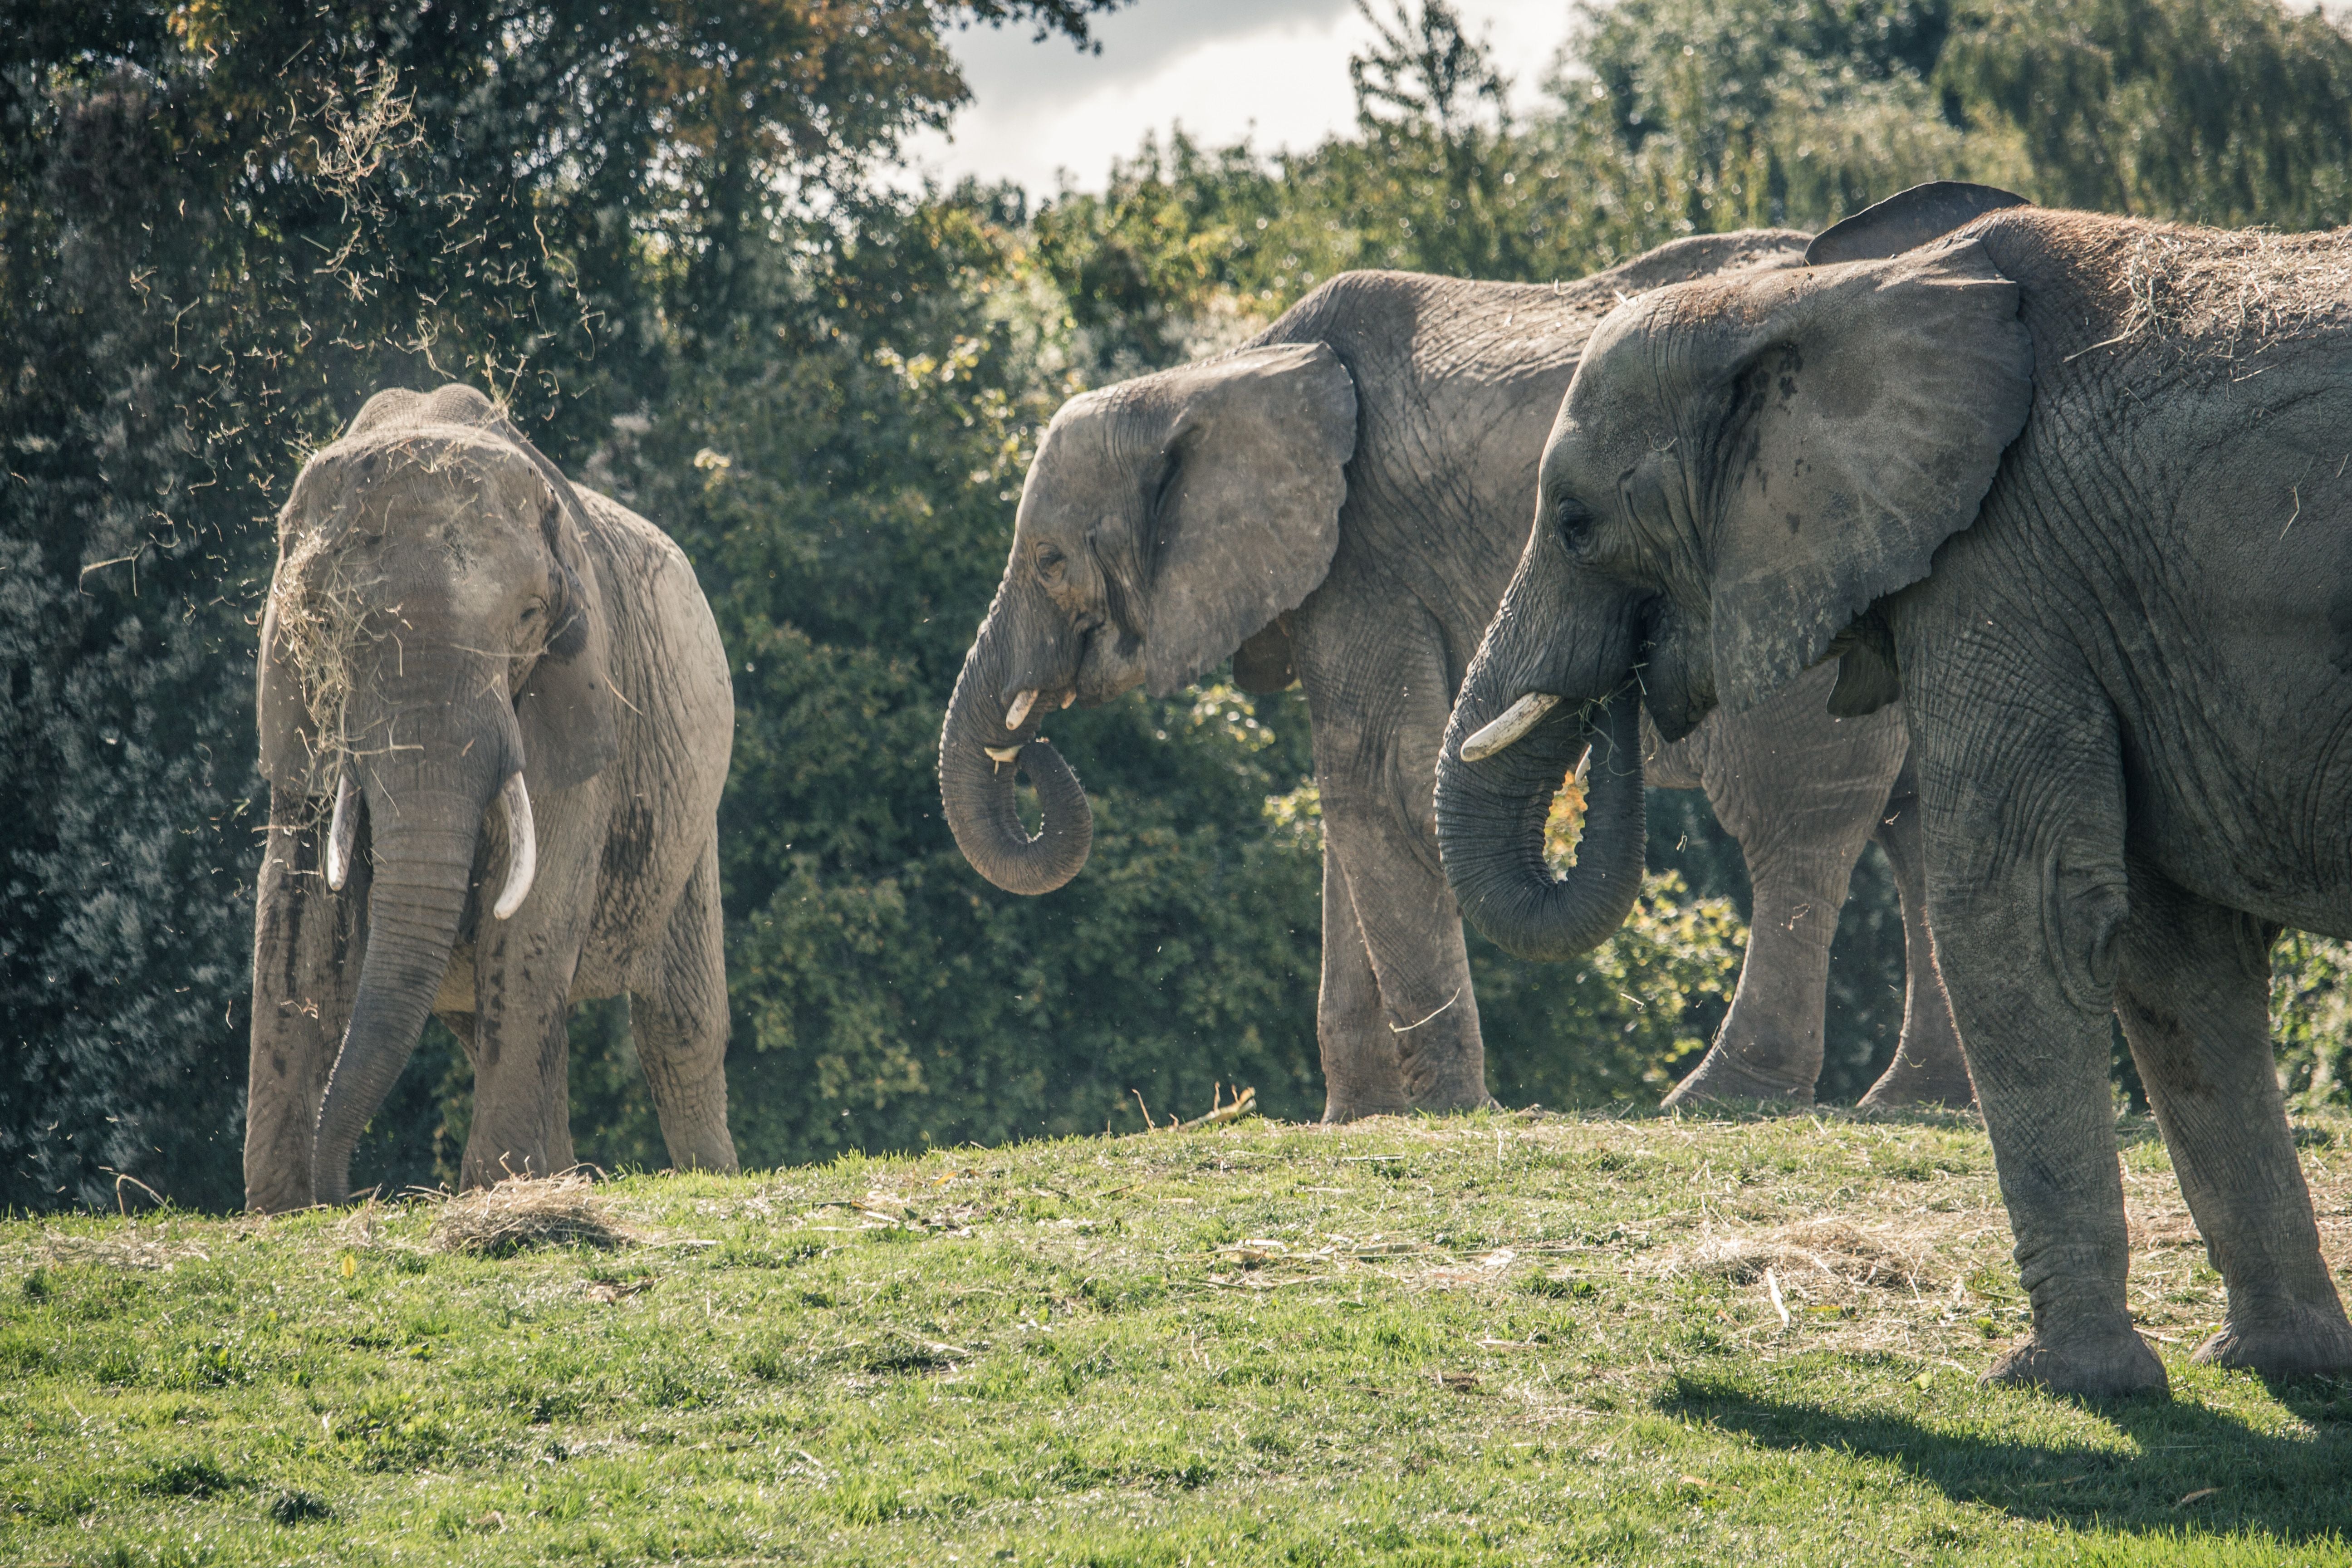 Three of the elephants at Howletts Wild Animal Park in Kent